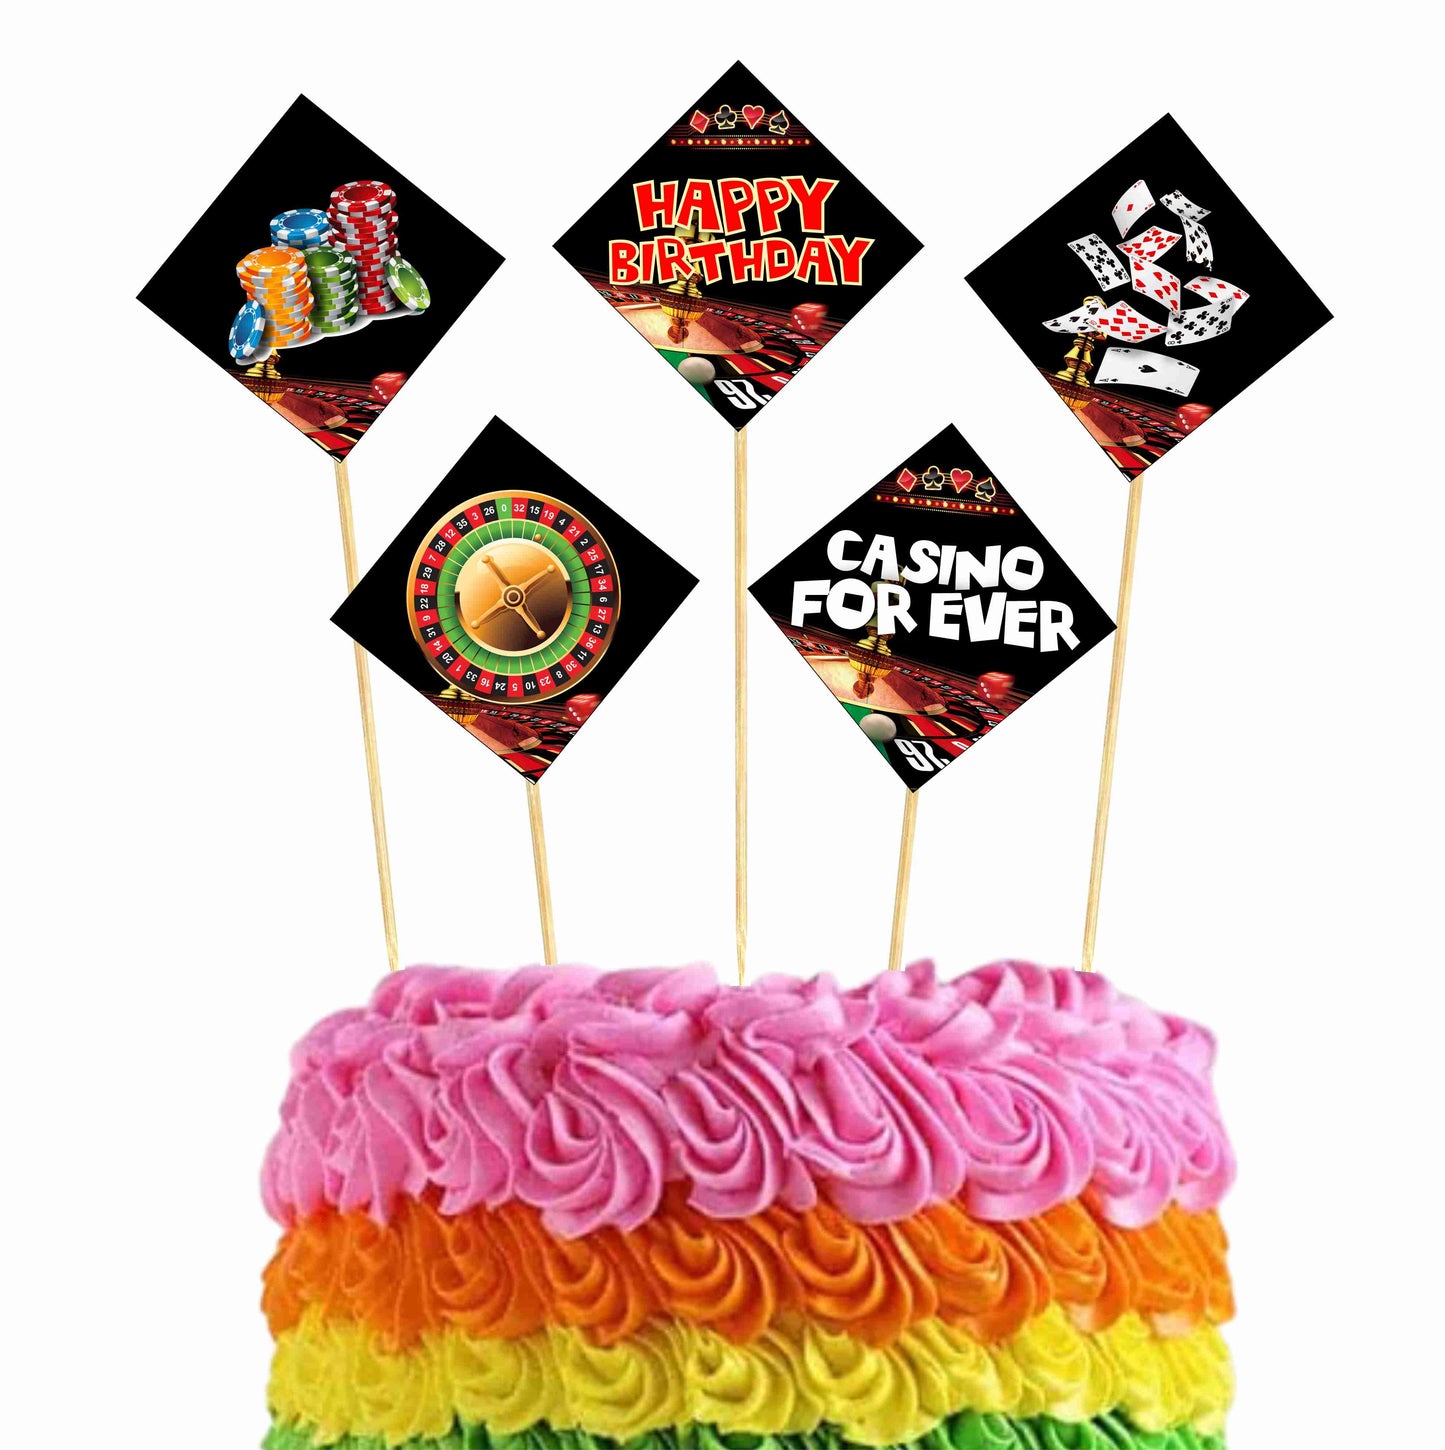 Casino Poker Theme Cake Topper Pack of 10 Nos for Birthday Cake Decoration Theme Party Item For Boys Girls Adults Birthday Theme Decor